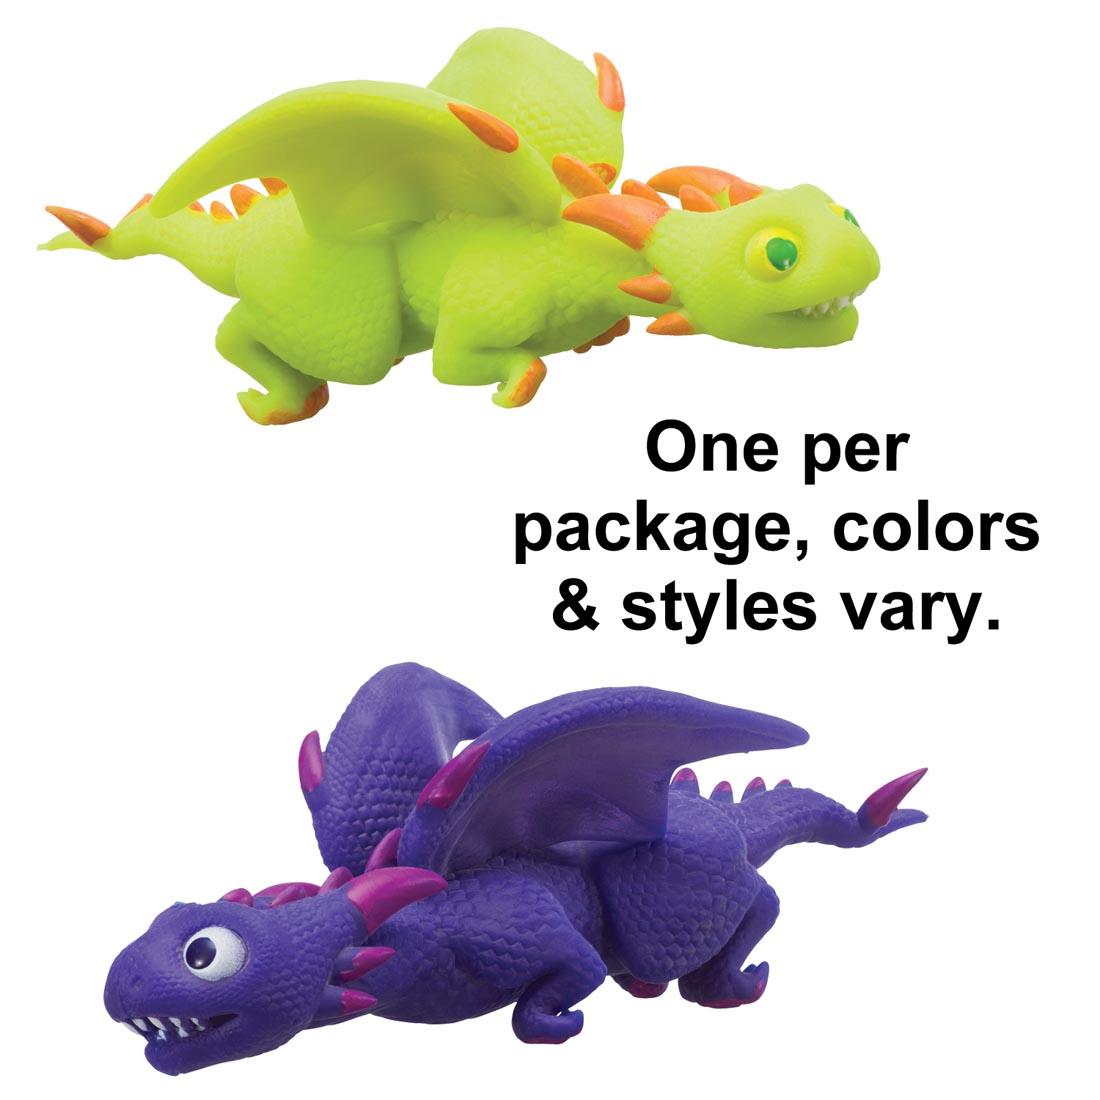 Two Epic Dragon Stretchy Toys with the text One per package, colors & styles vary